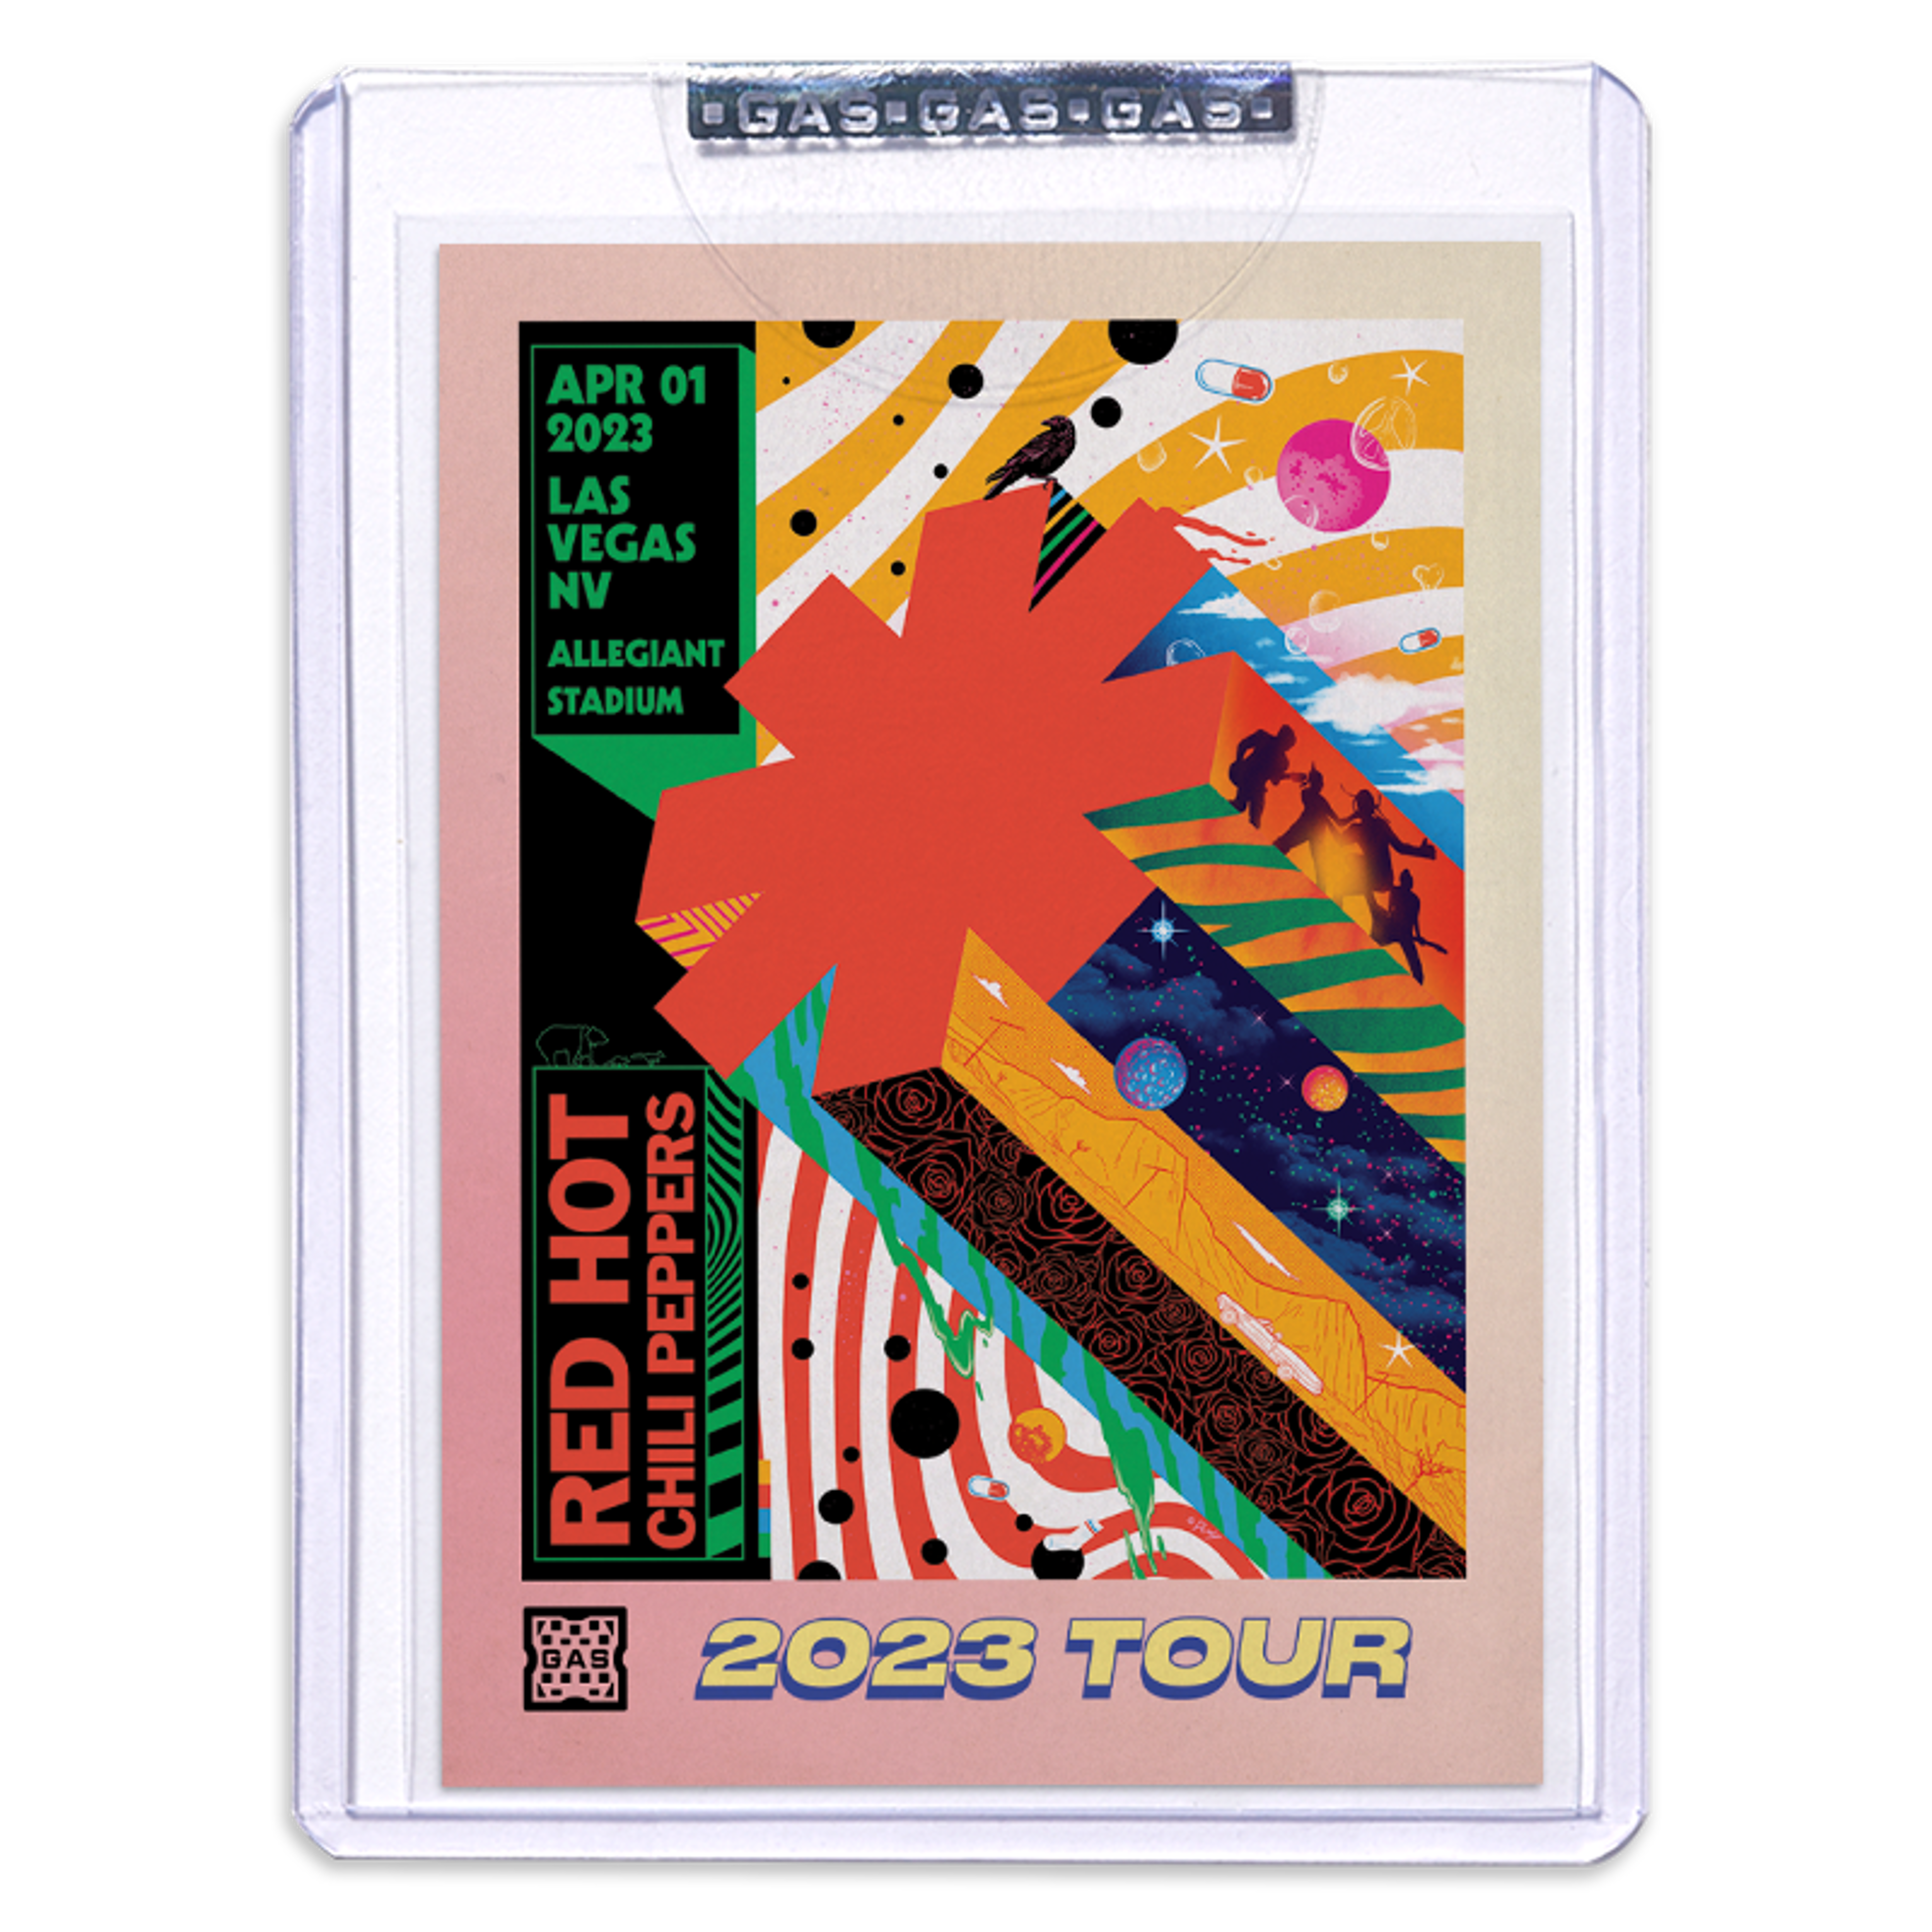 GAS Red Hot Chili Peppers 2023 Tour – 4/1 Las Vegas, NV Card b